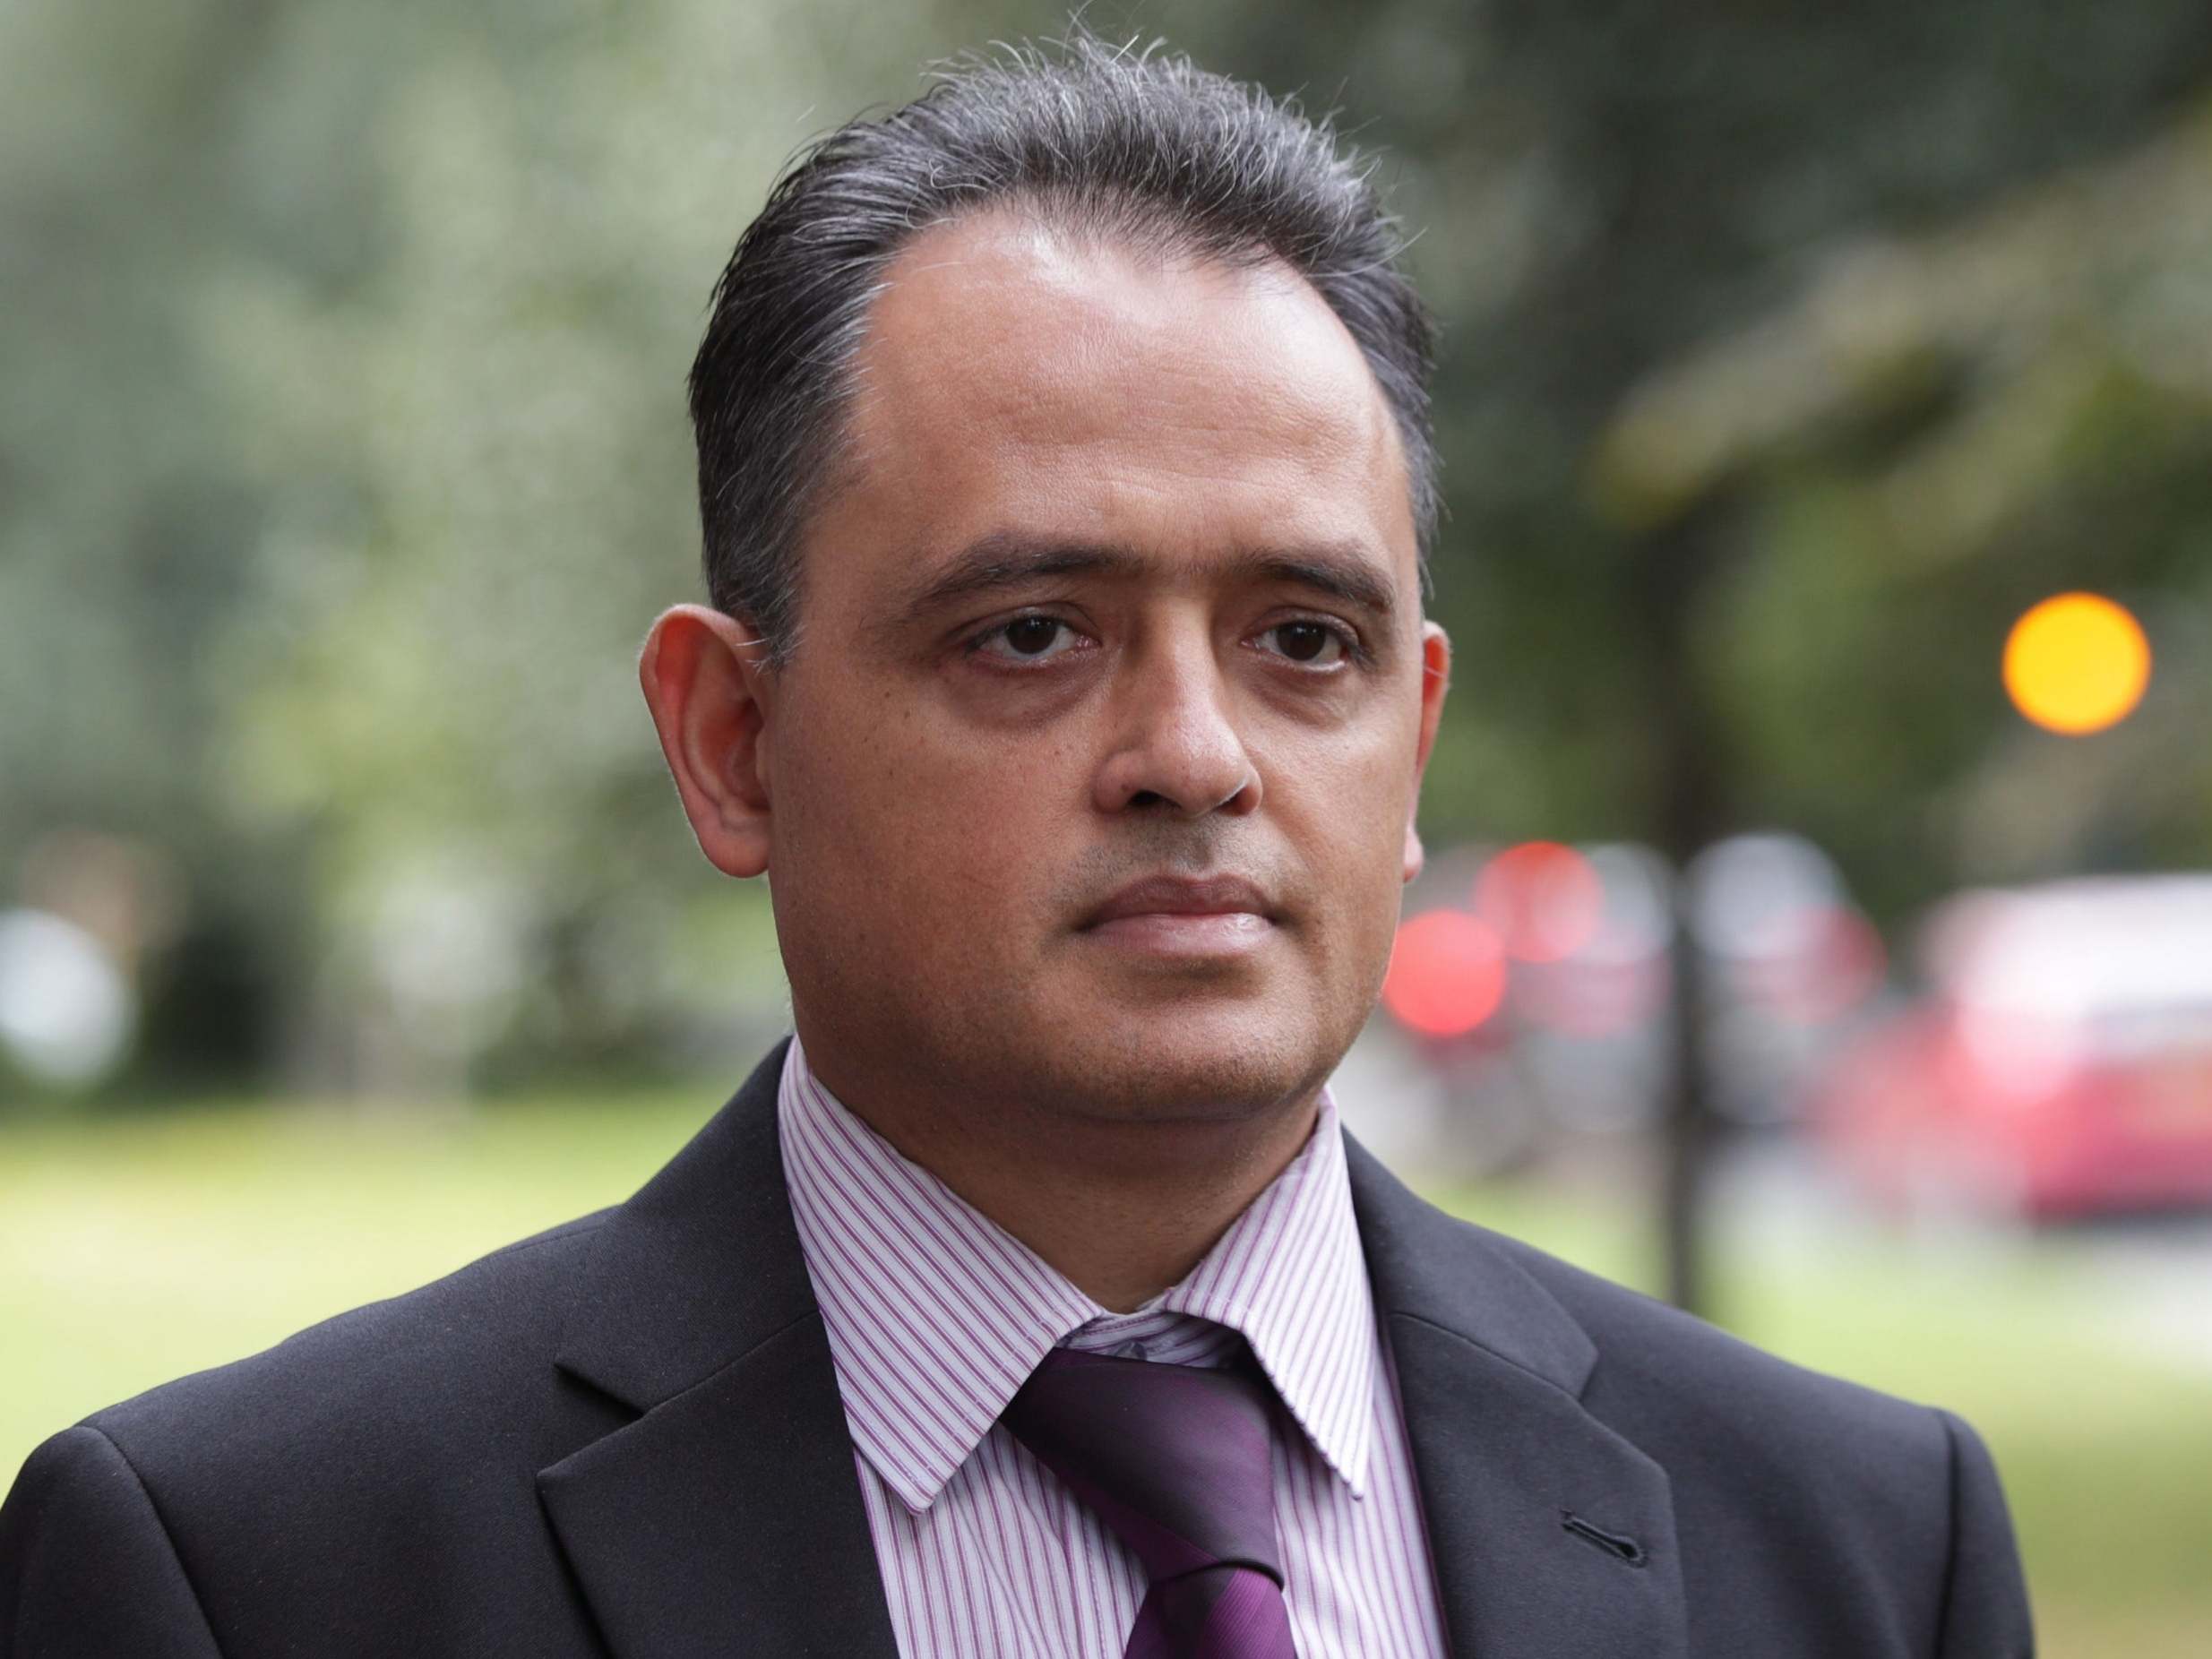 Manish Shah found guilty of 25 sexual offences against six victims